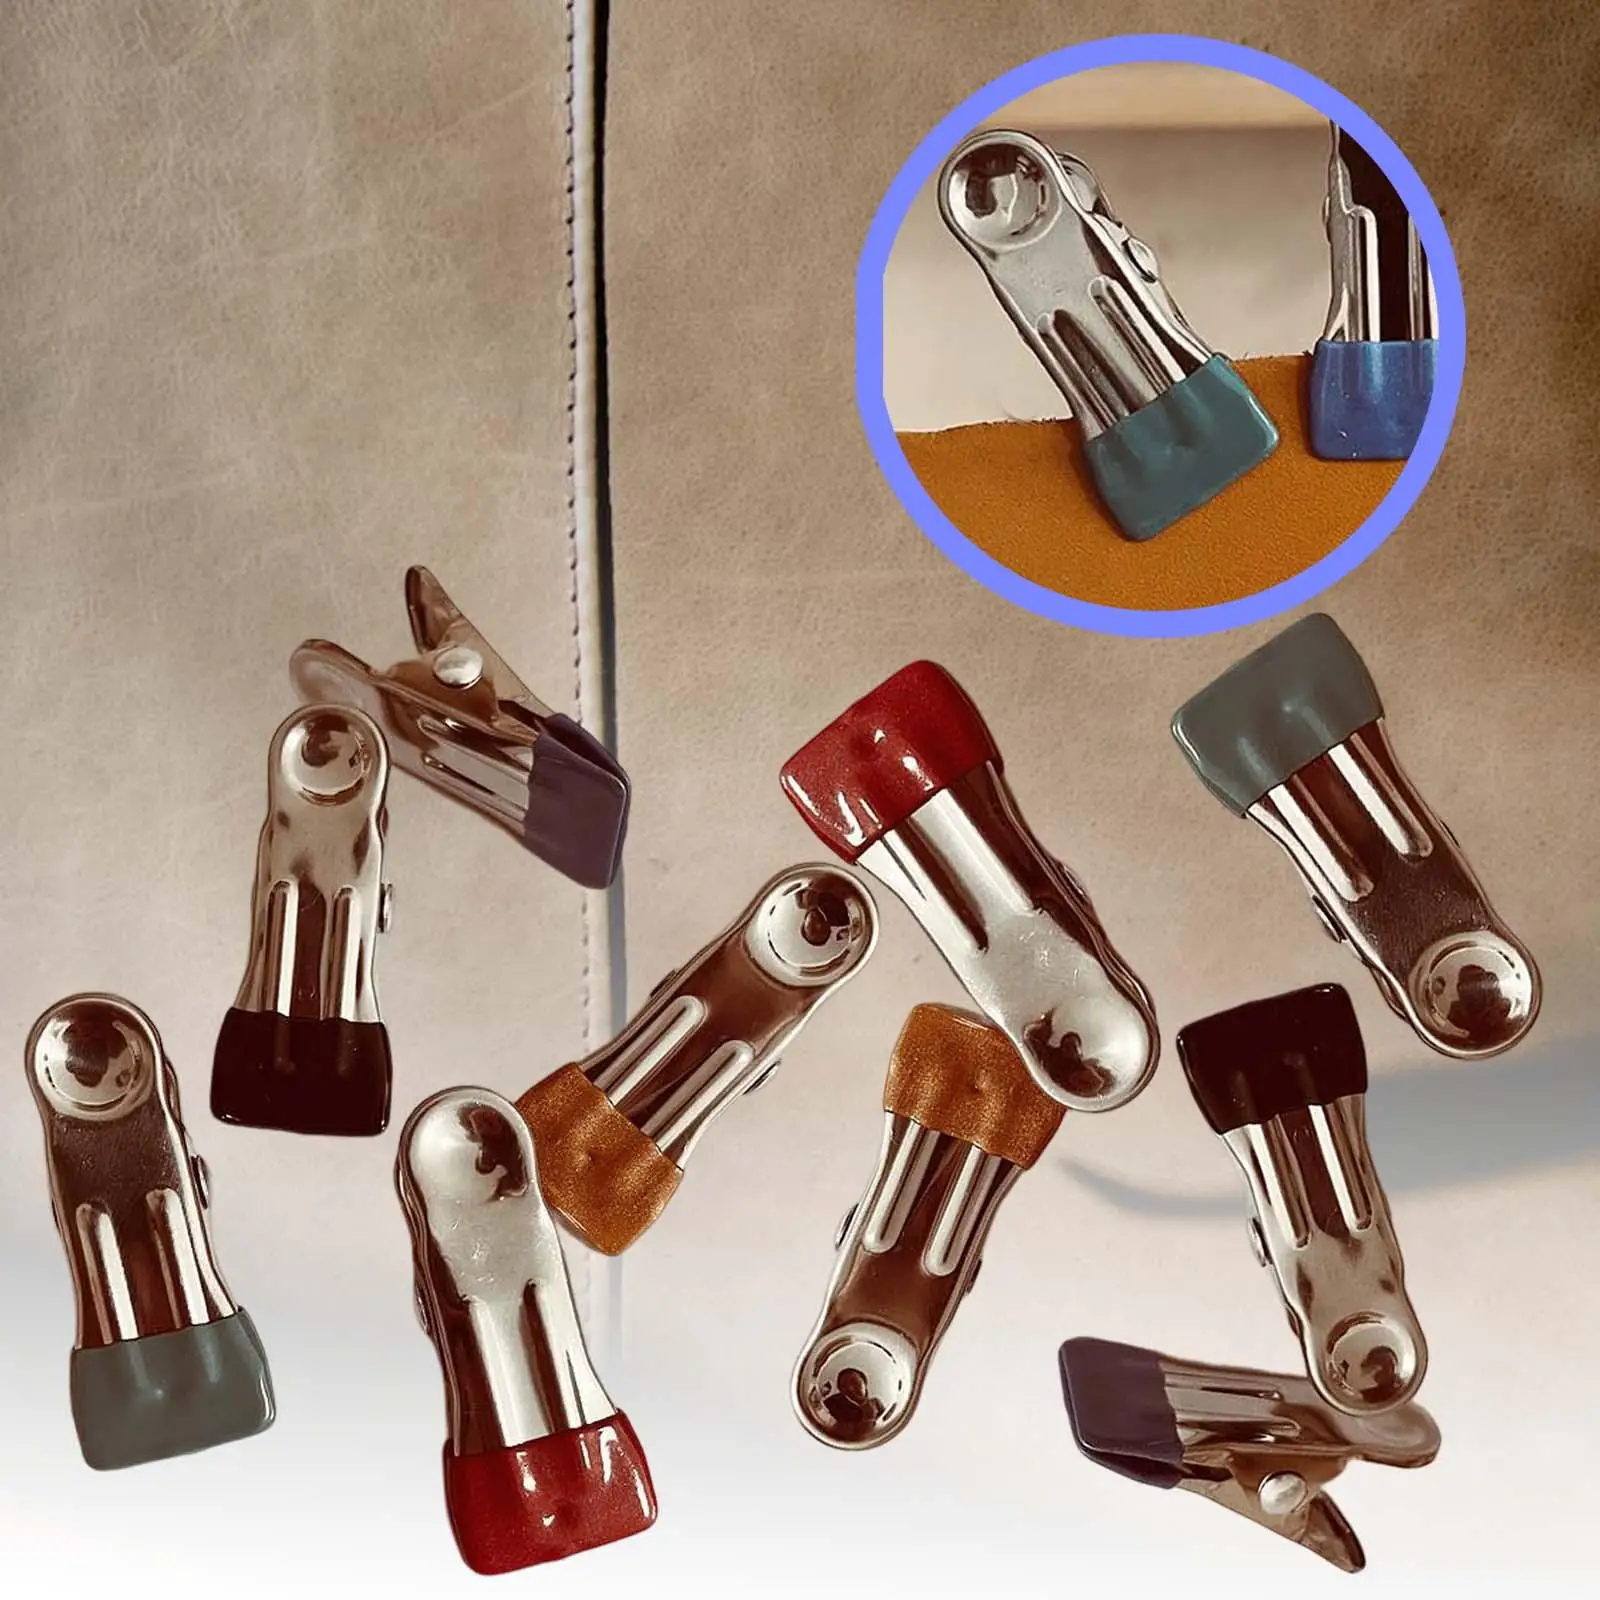 10x Stainless Steel Sewing Clips No Trace Clip Fabric Clamps Paper Work Durable Portable Strong Edging Fabric Position for Parts